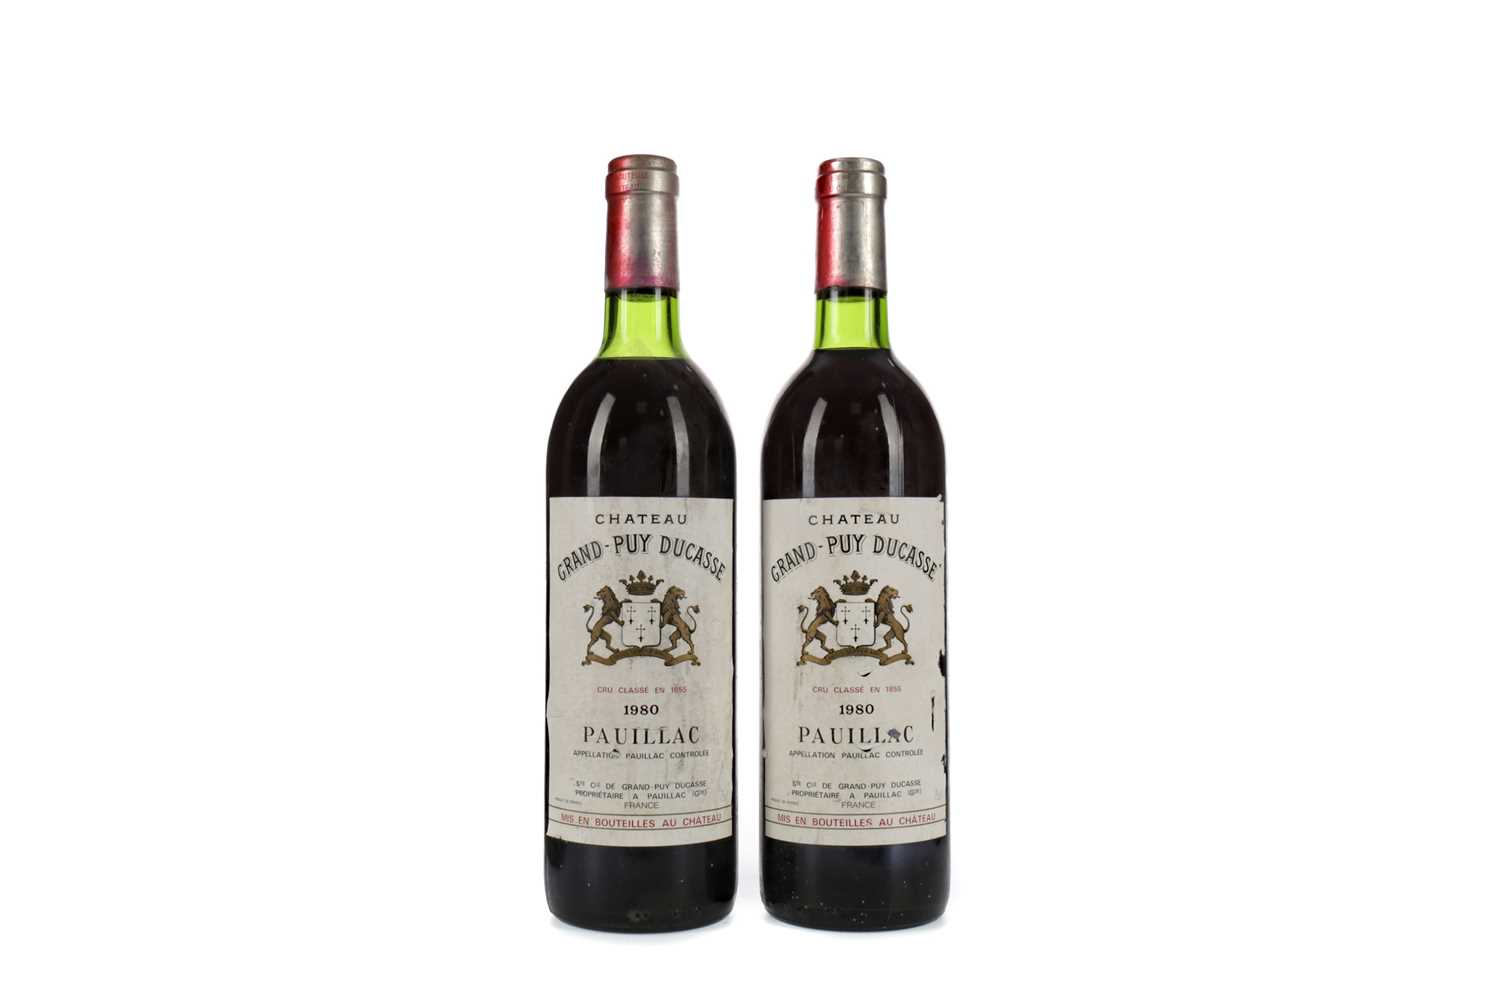 Lot 49 - TWO BOTTLES OF CHATEAU GRAND PUY DUCASSE 1980